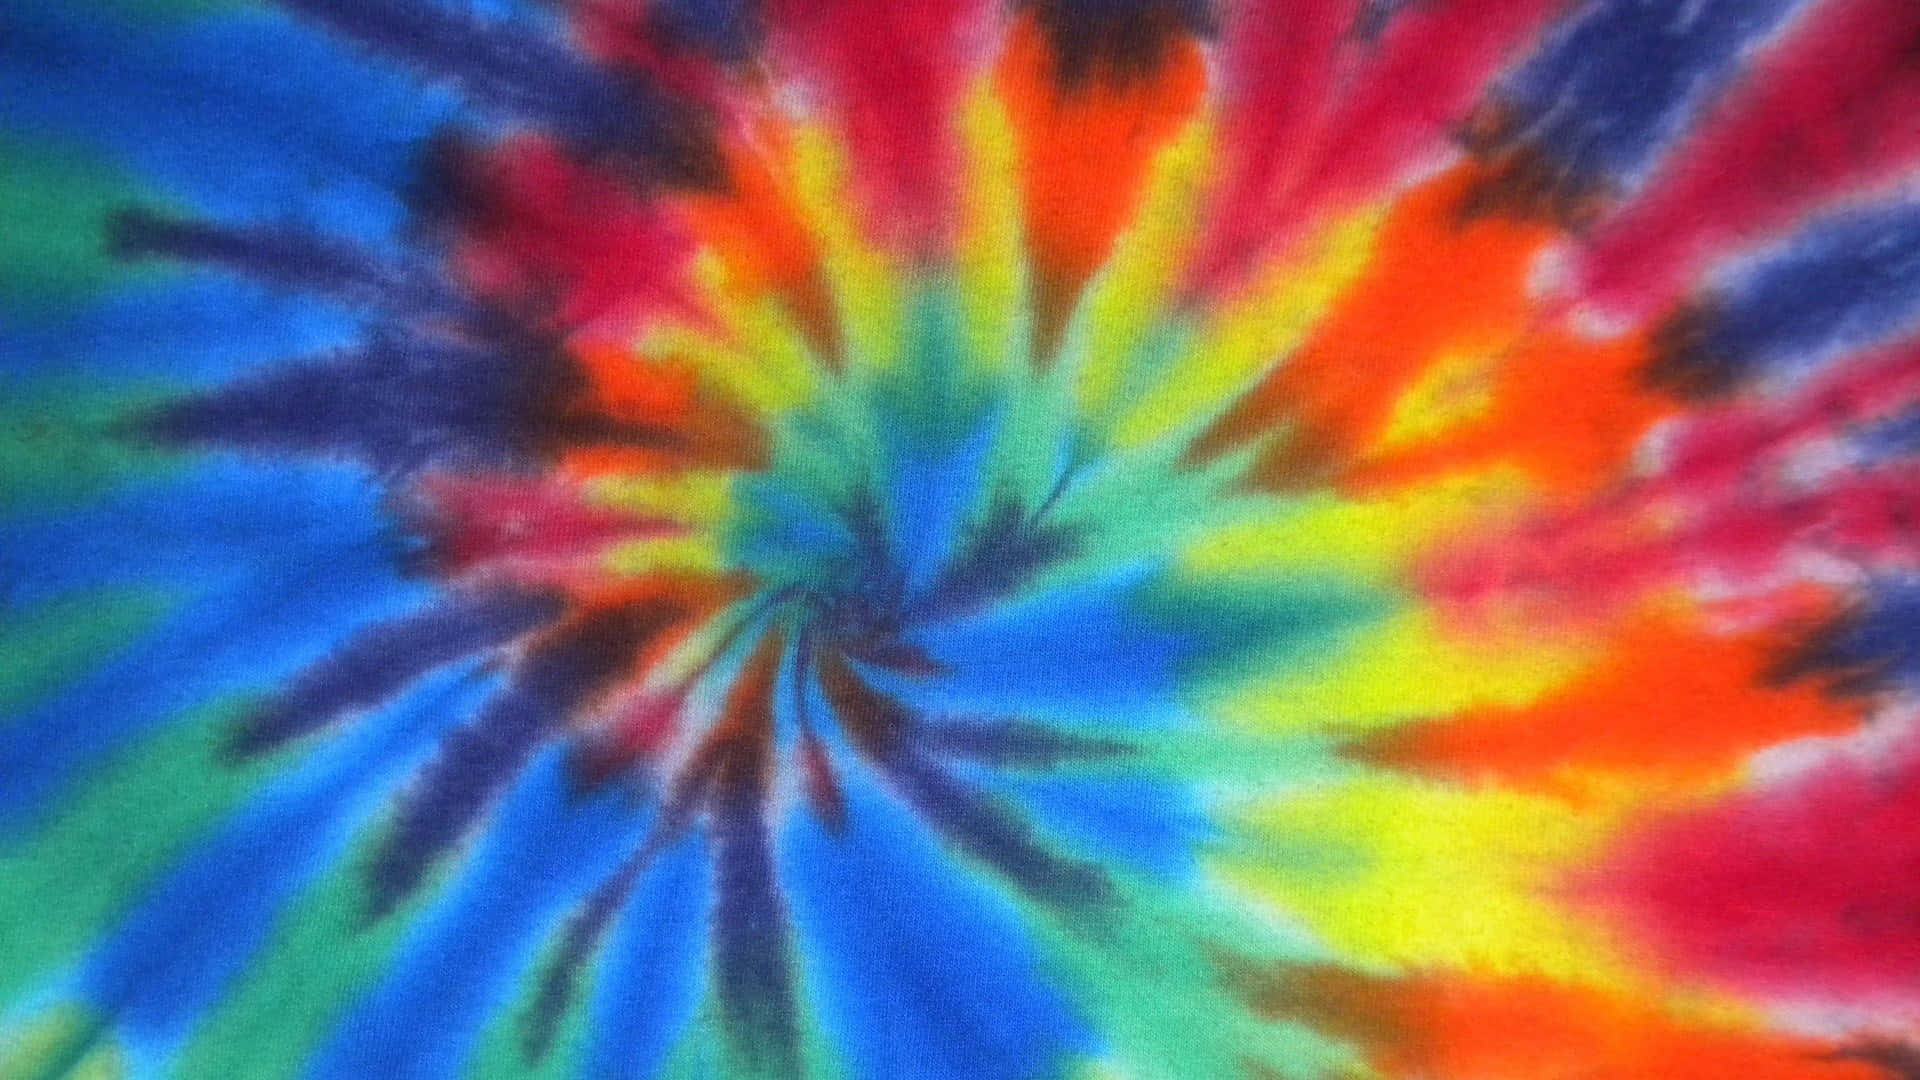 Colorful droplets of tie dye.